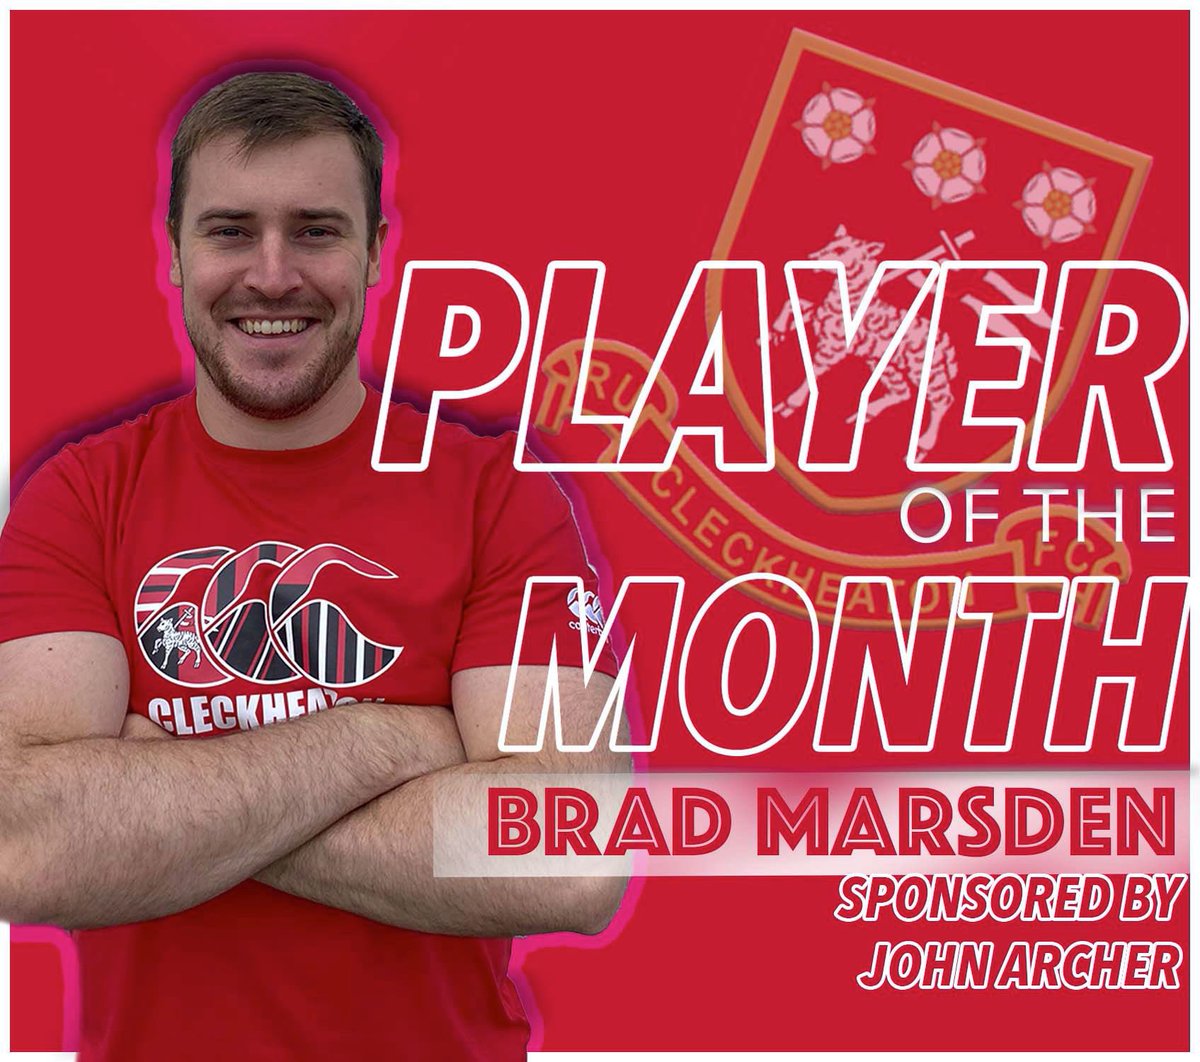 Cleckheaton’s player of the month for September is utility forward Brad Marsden, Congratulations Brad and big Thanks to John Archer for the sponsorship 🔴⚪️🐑